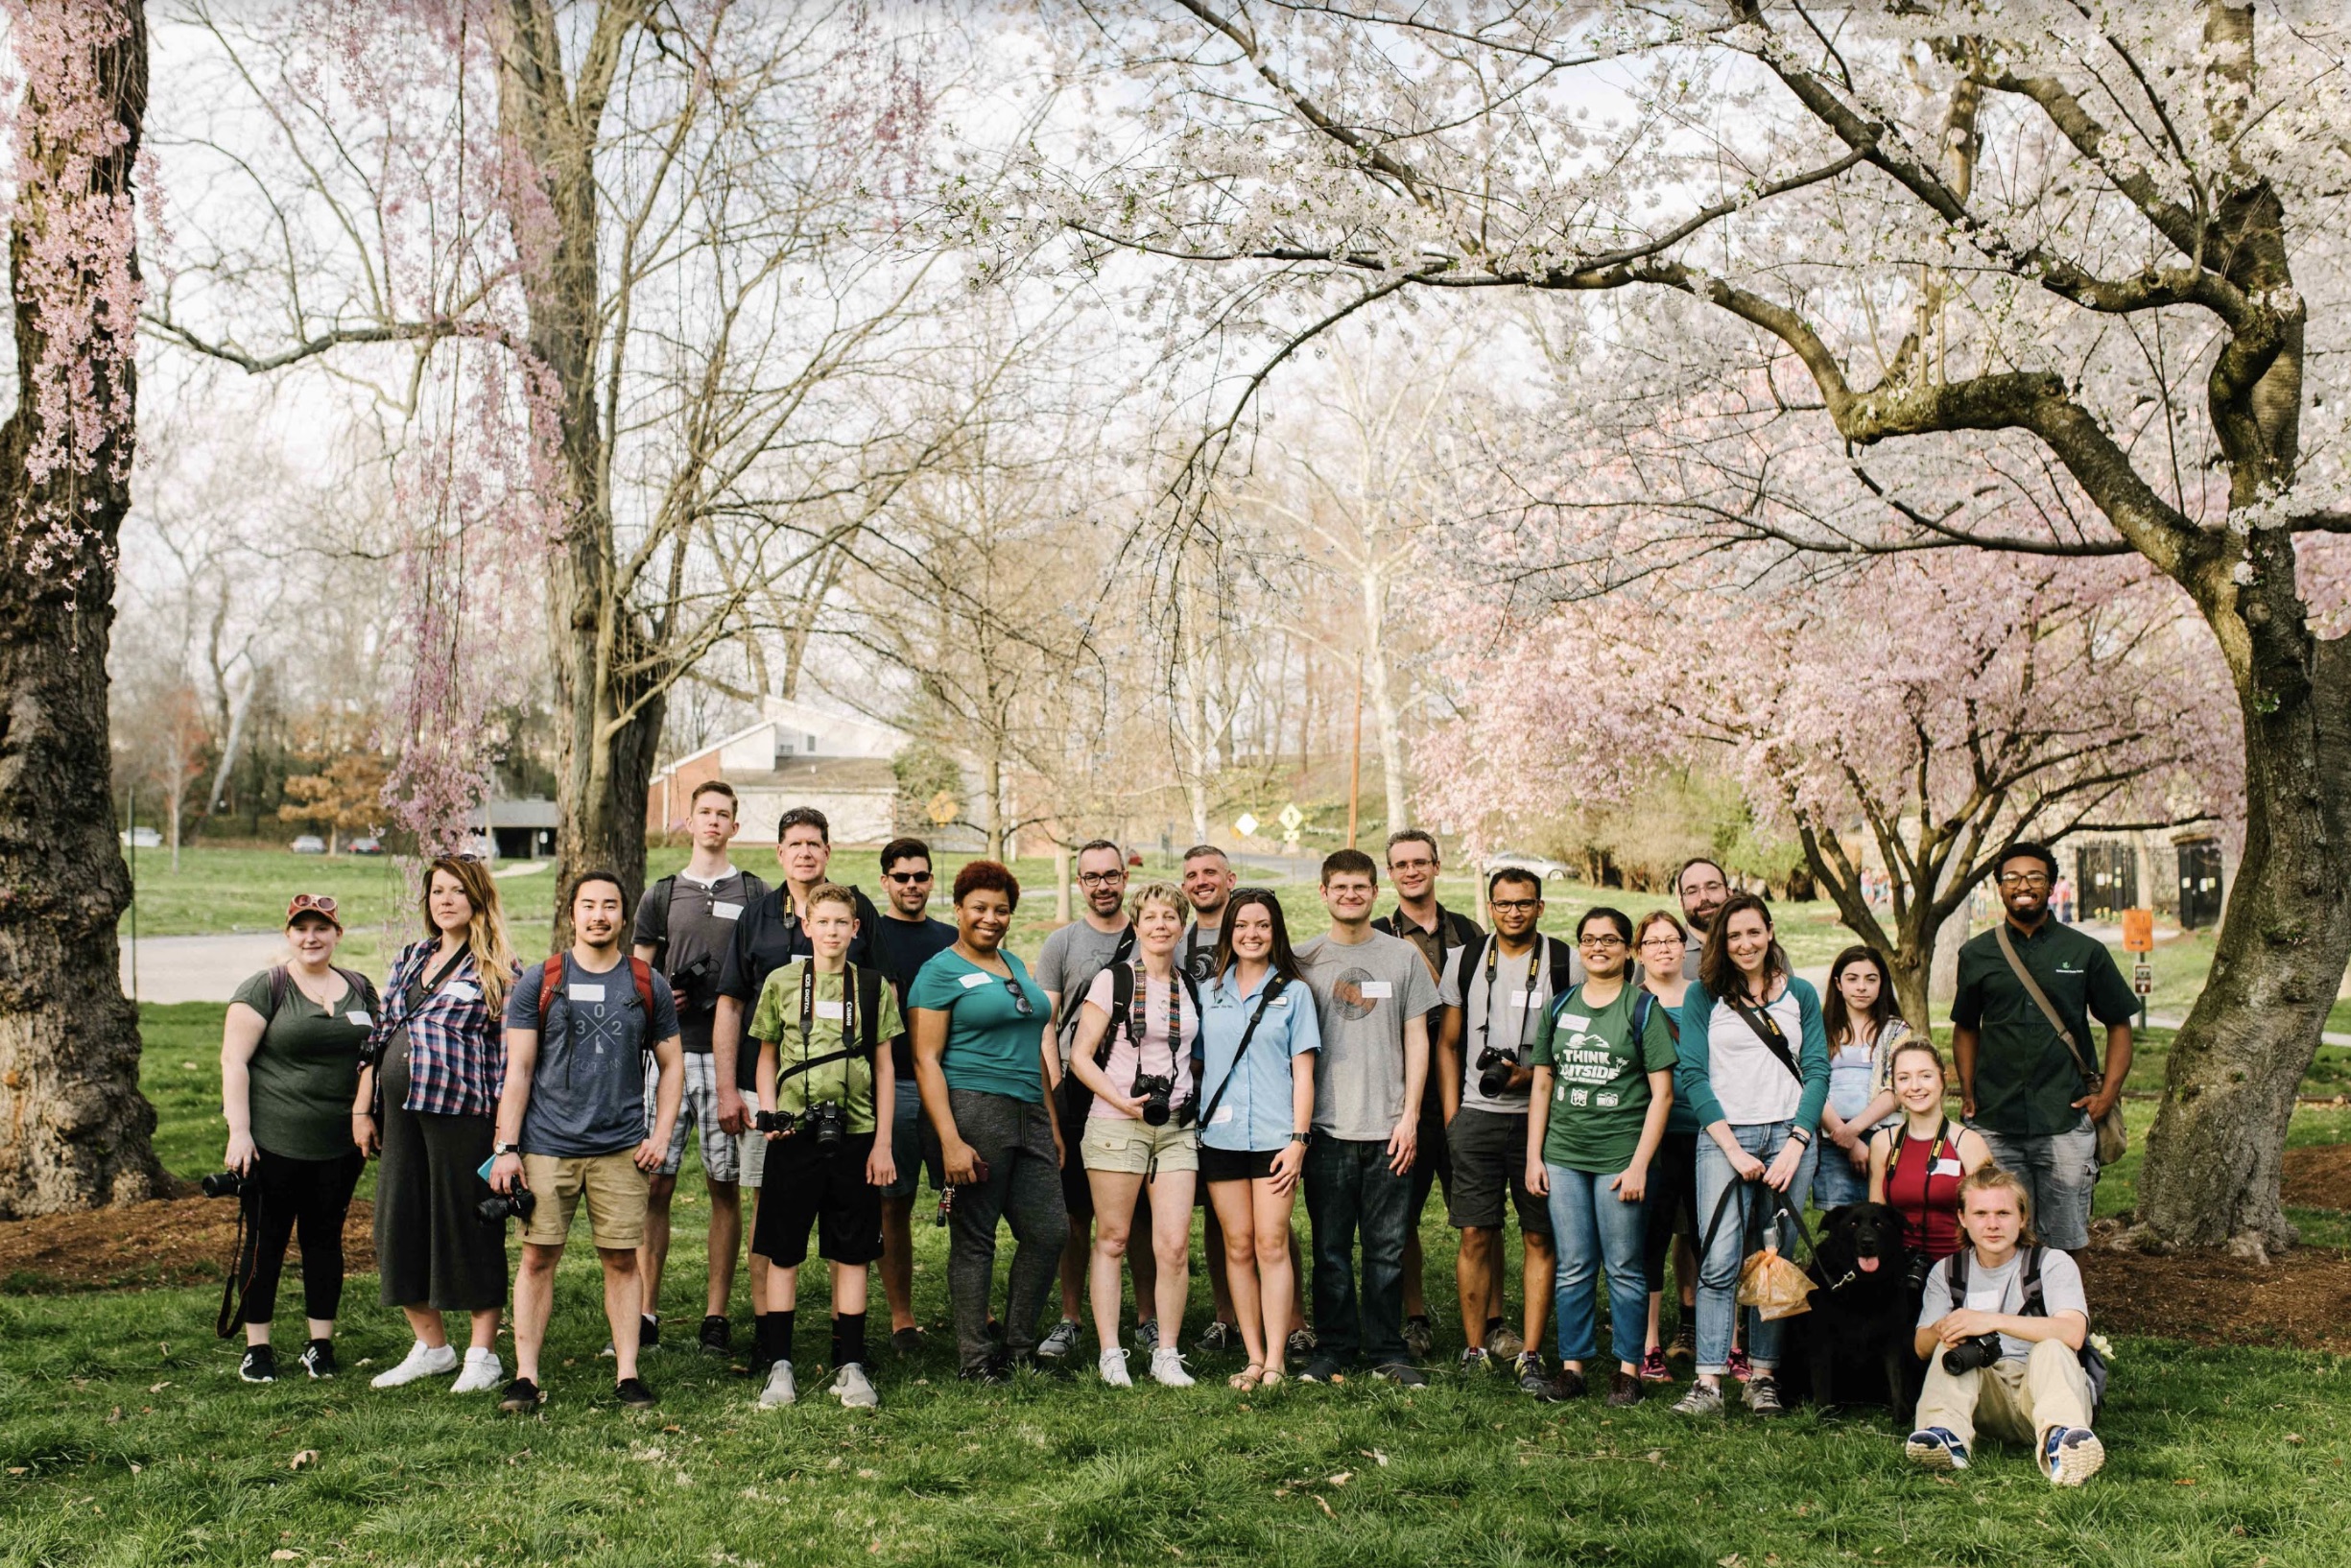 Spring InstaMeet attendees group photo